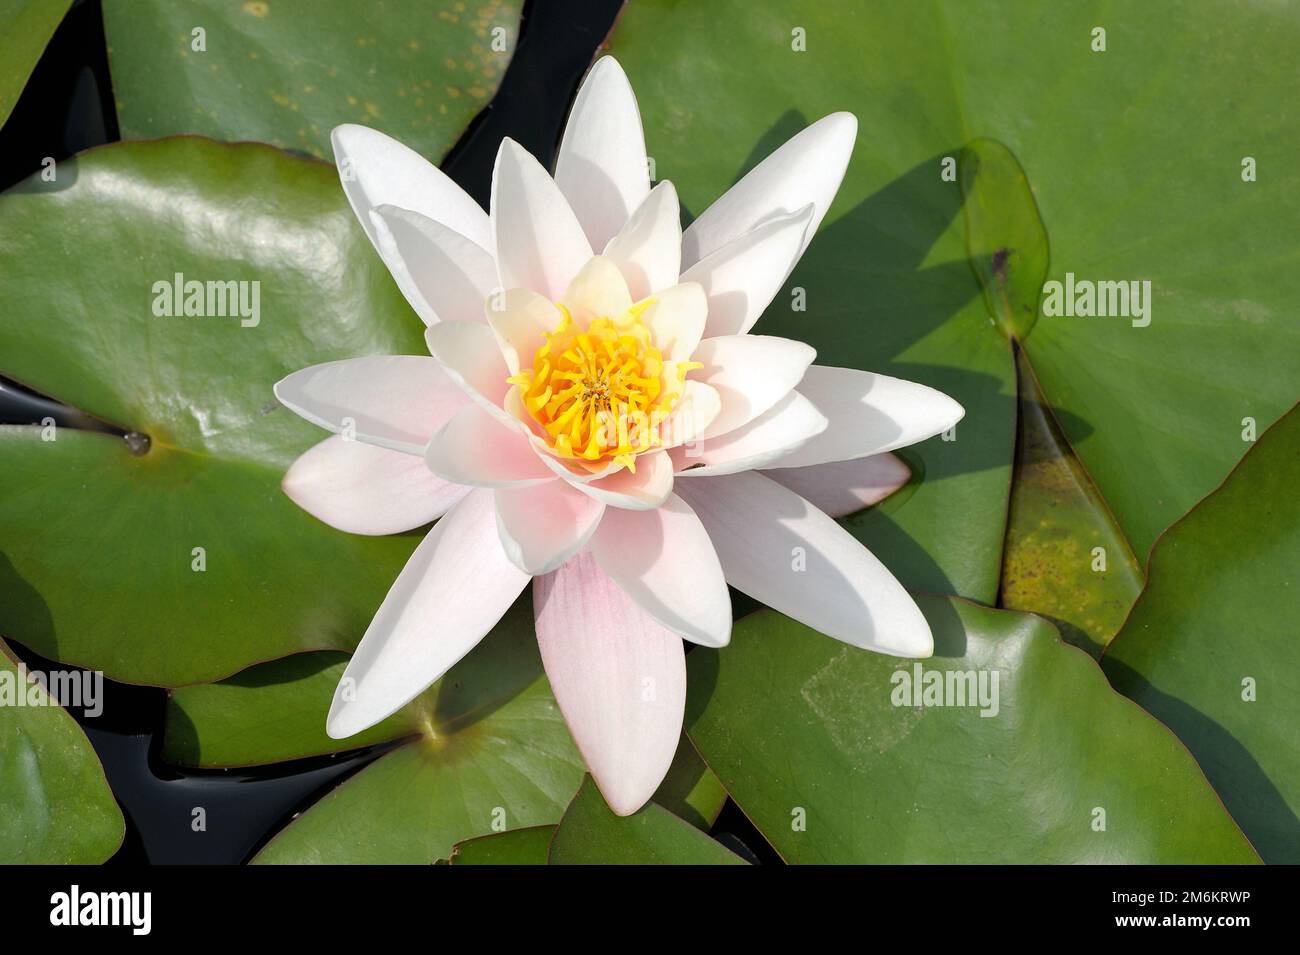 Flower white water lily Stock Photo